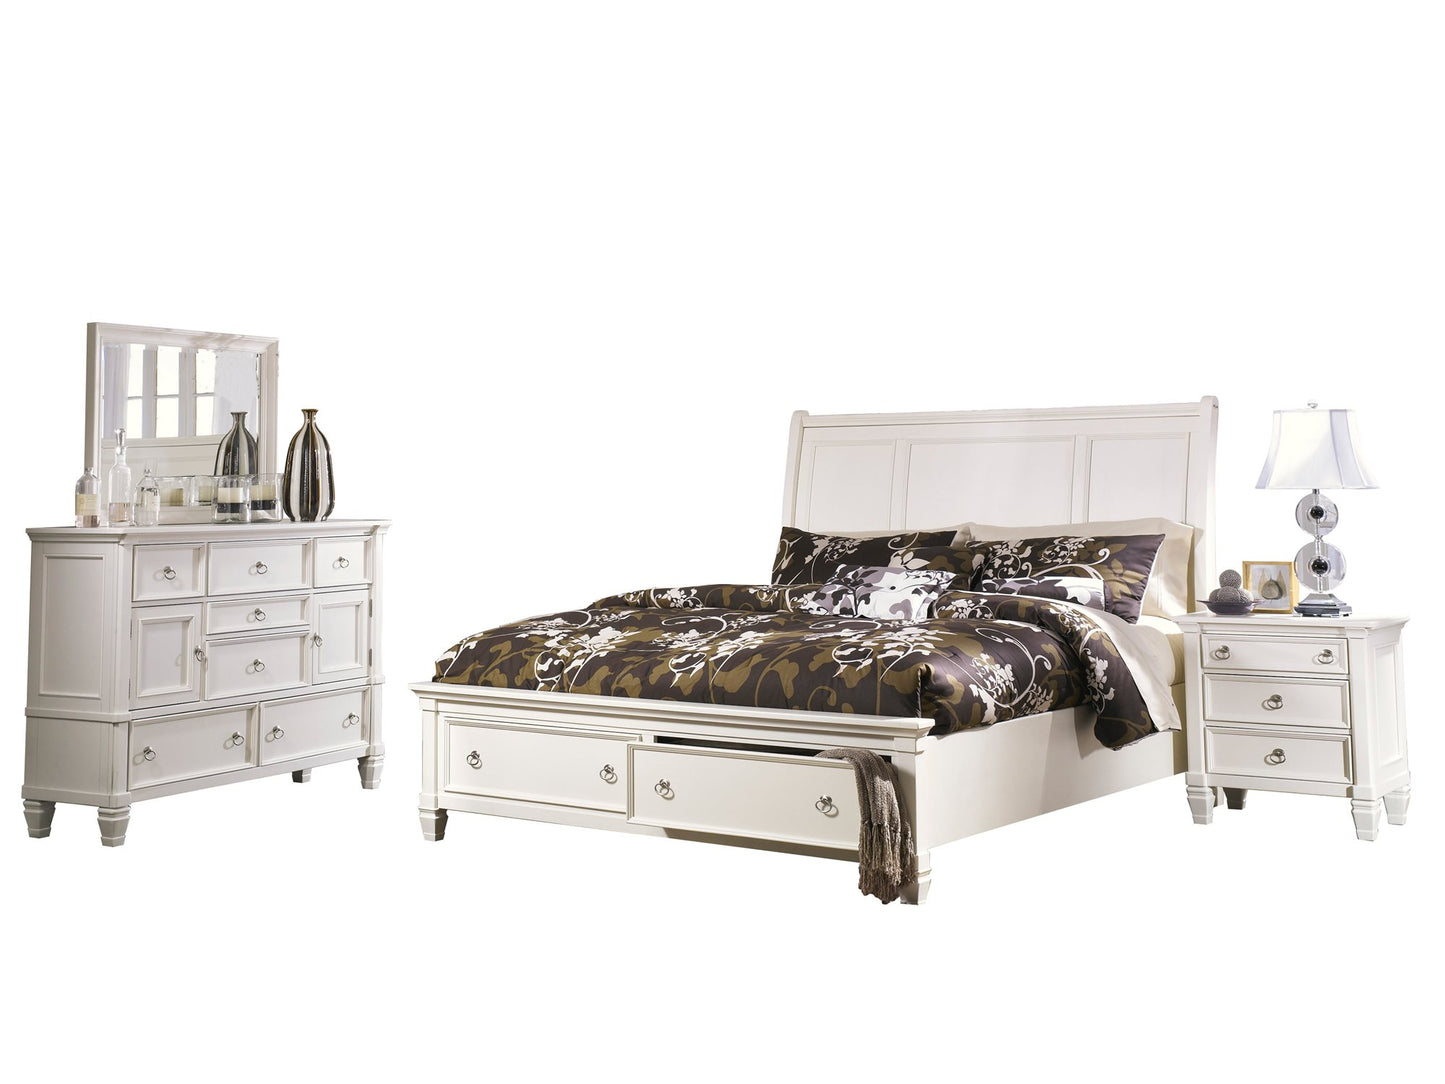 Ashley Prentice 4PC Bedroom Set E King Sleigh Bed Dresser Mirror One Nightstand in White